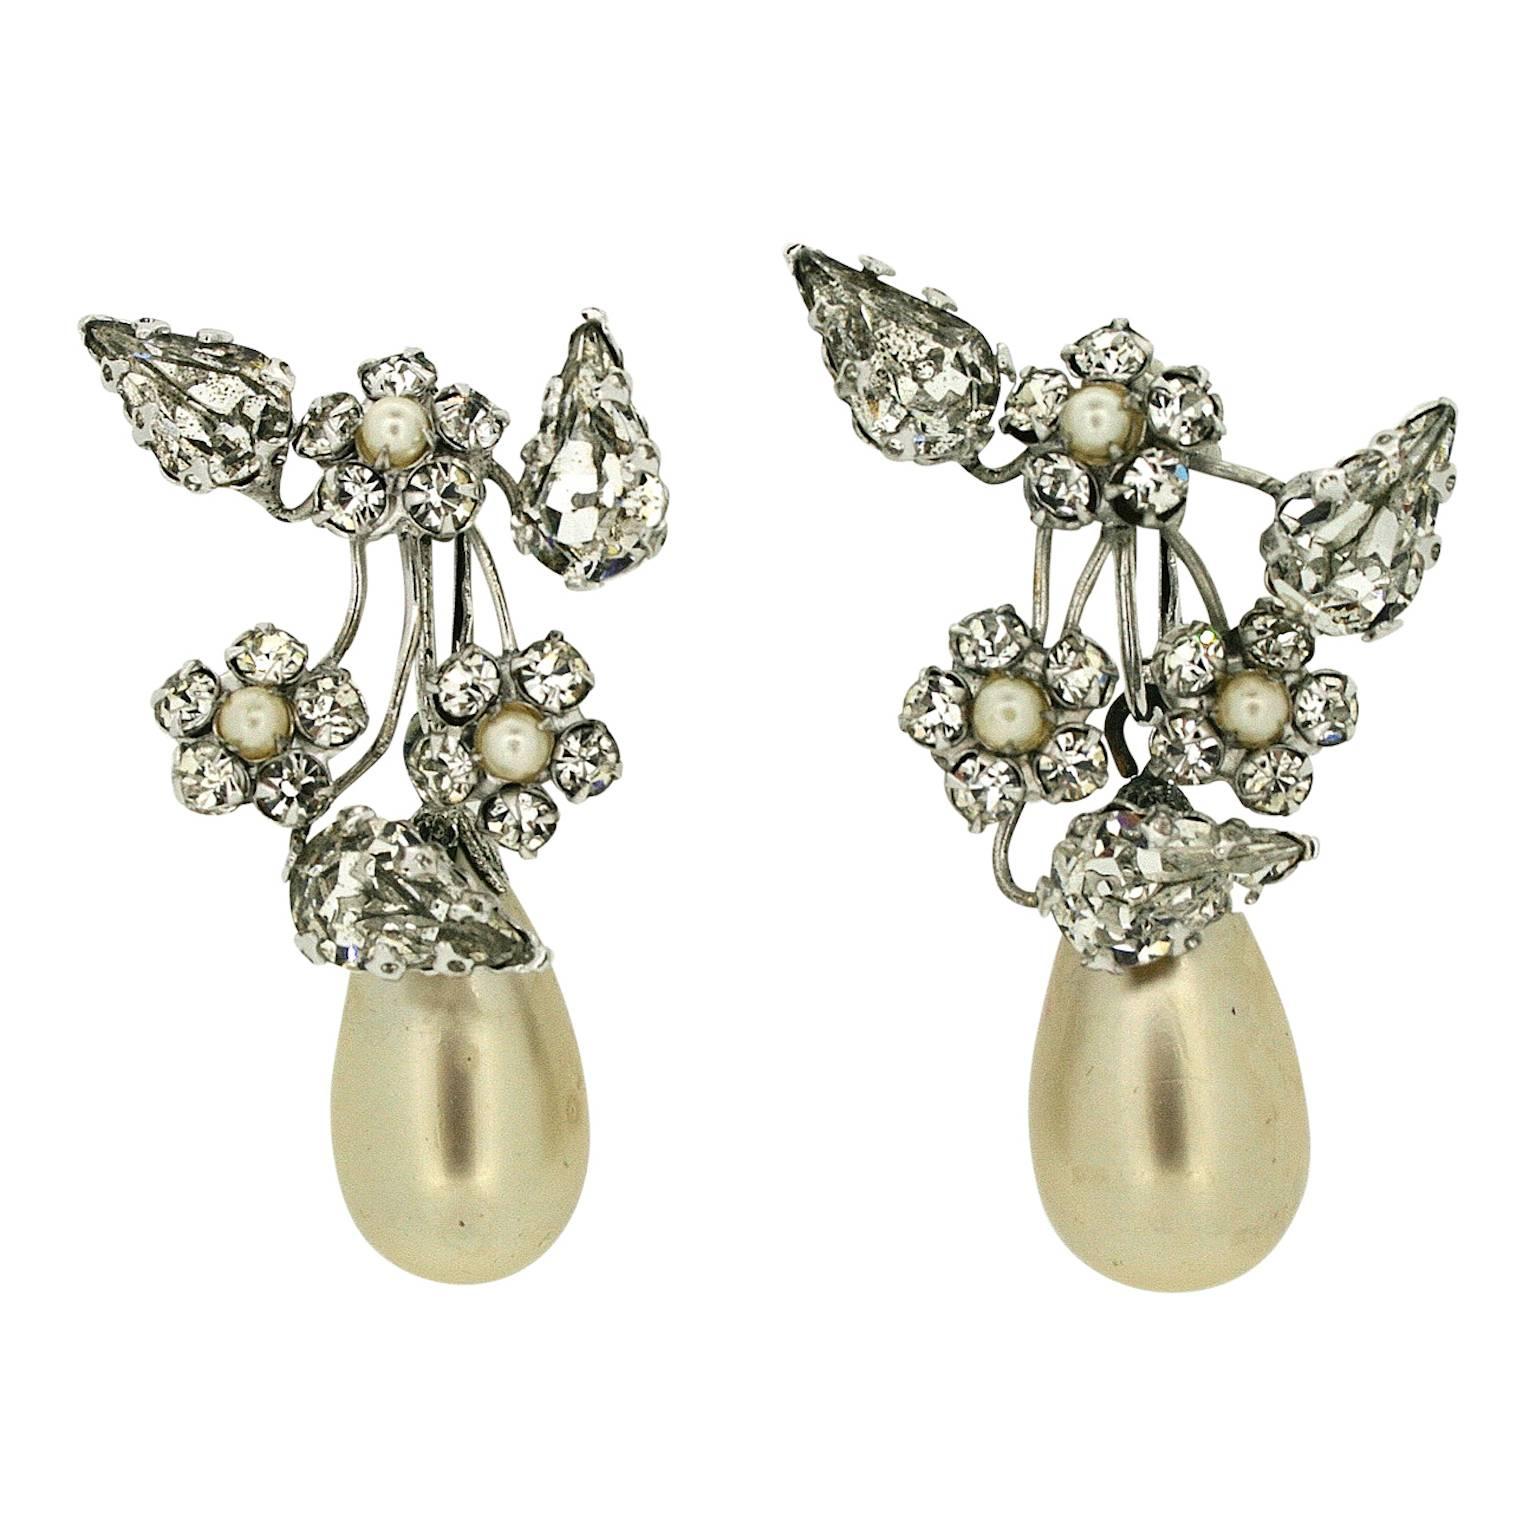 Schreiner 1950s Rhinestone and Faux Pearl Vintage Floral Earrings For Sale